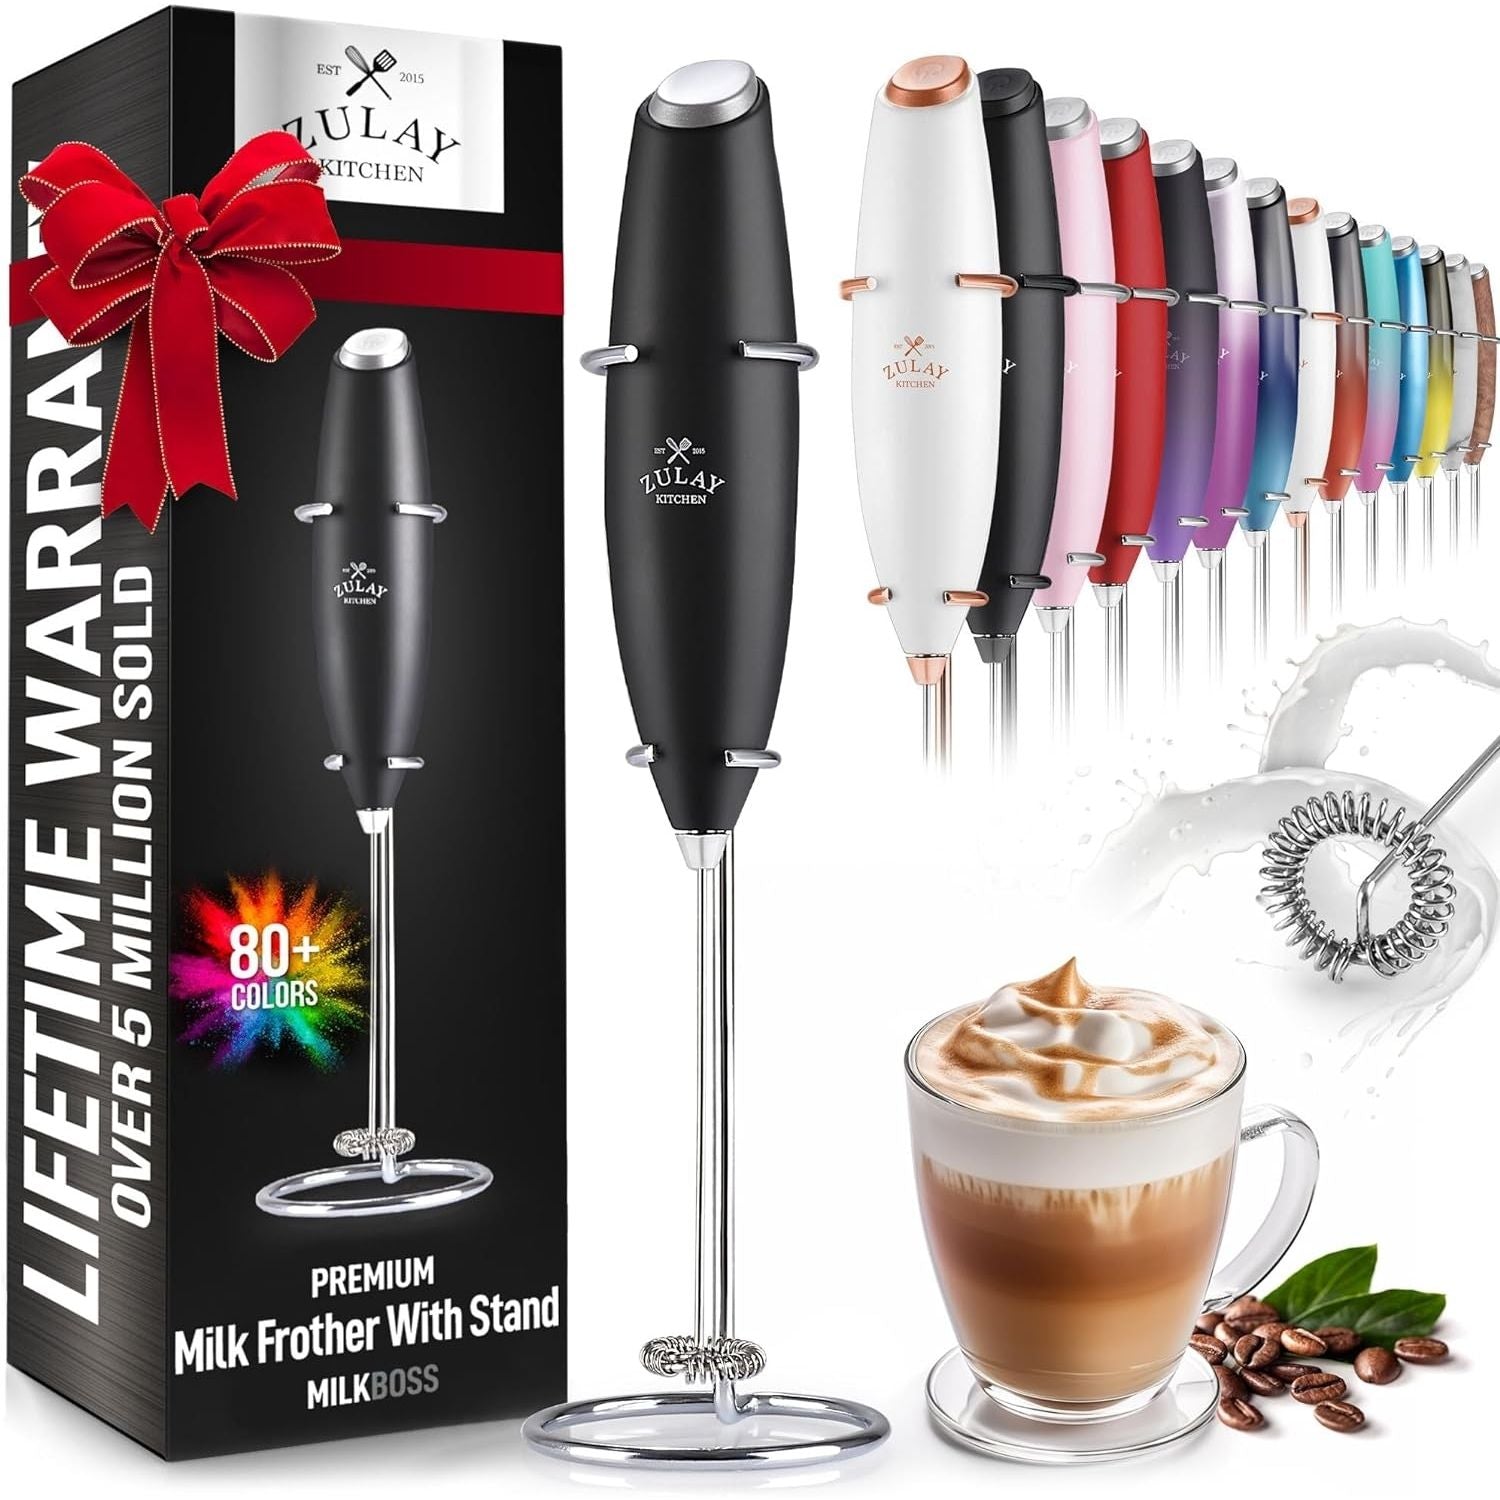 Different variations of Zulay Kitchen Milk Boss Milk Frother